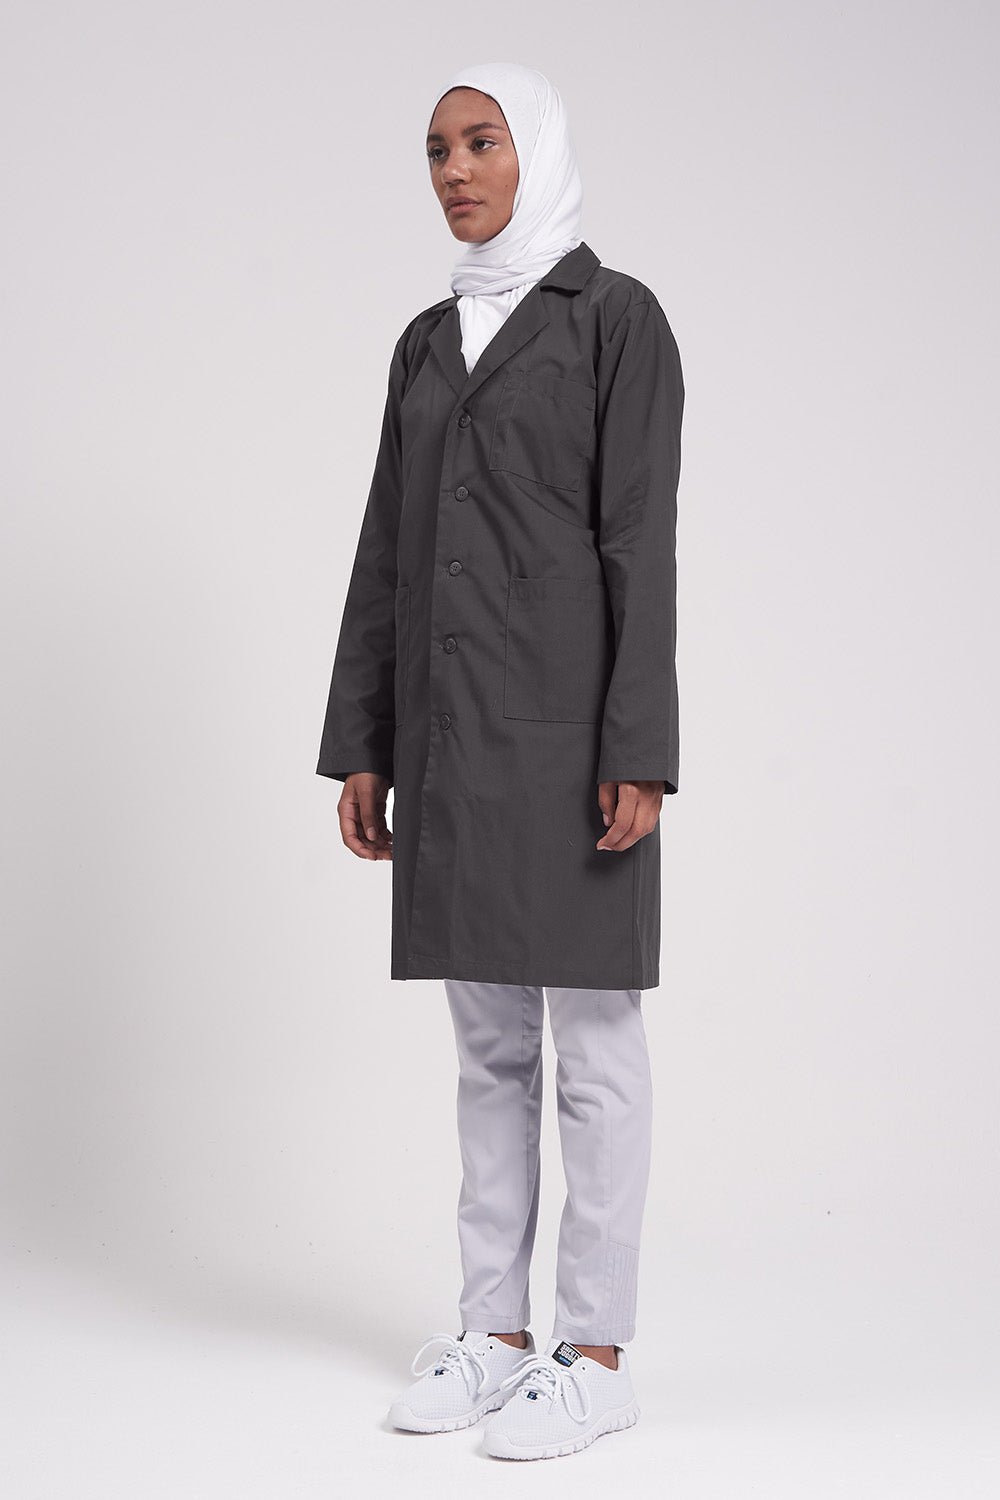 Unisex Labcoat 39" with Inner Pockets 803 - Pewter